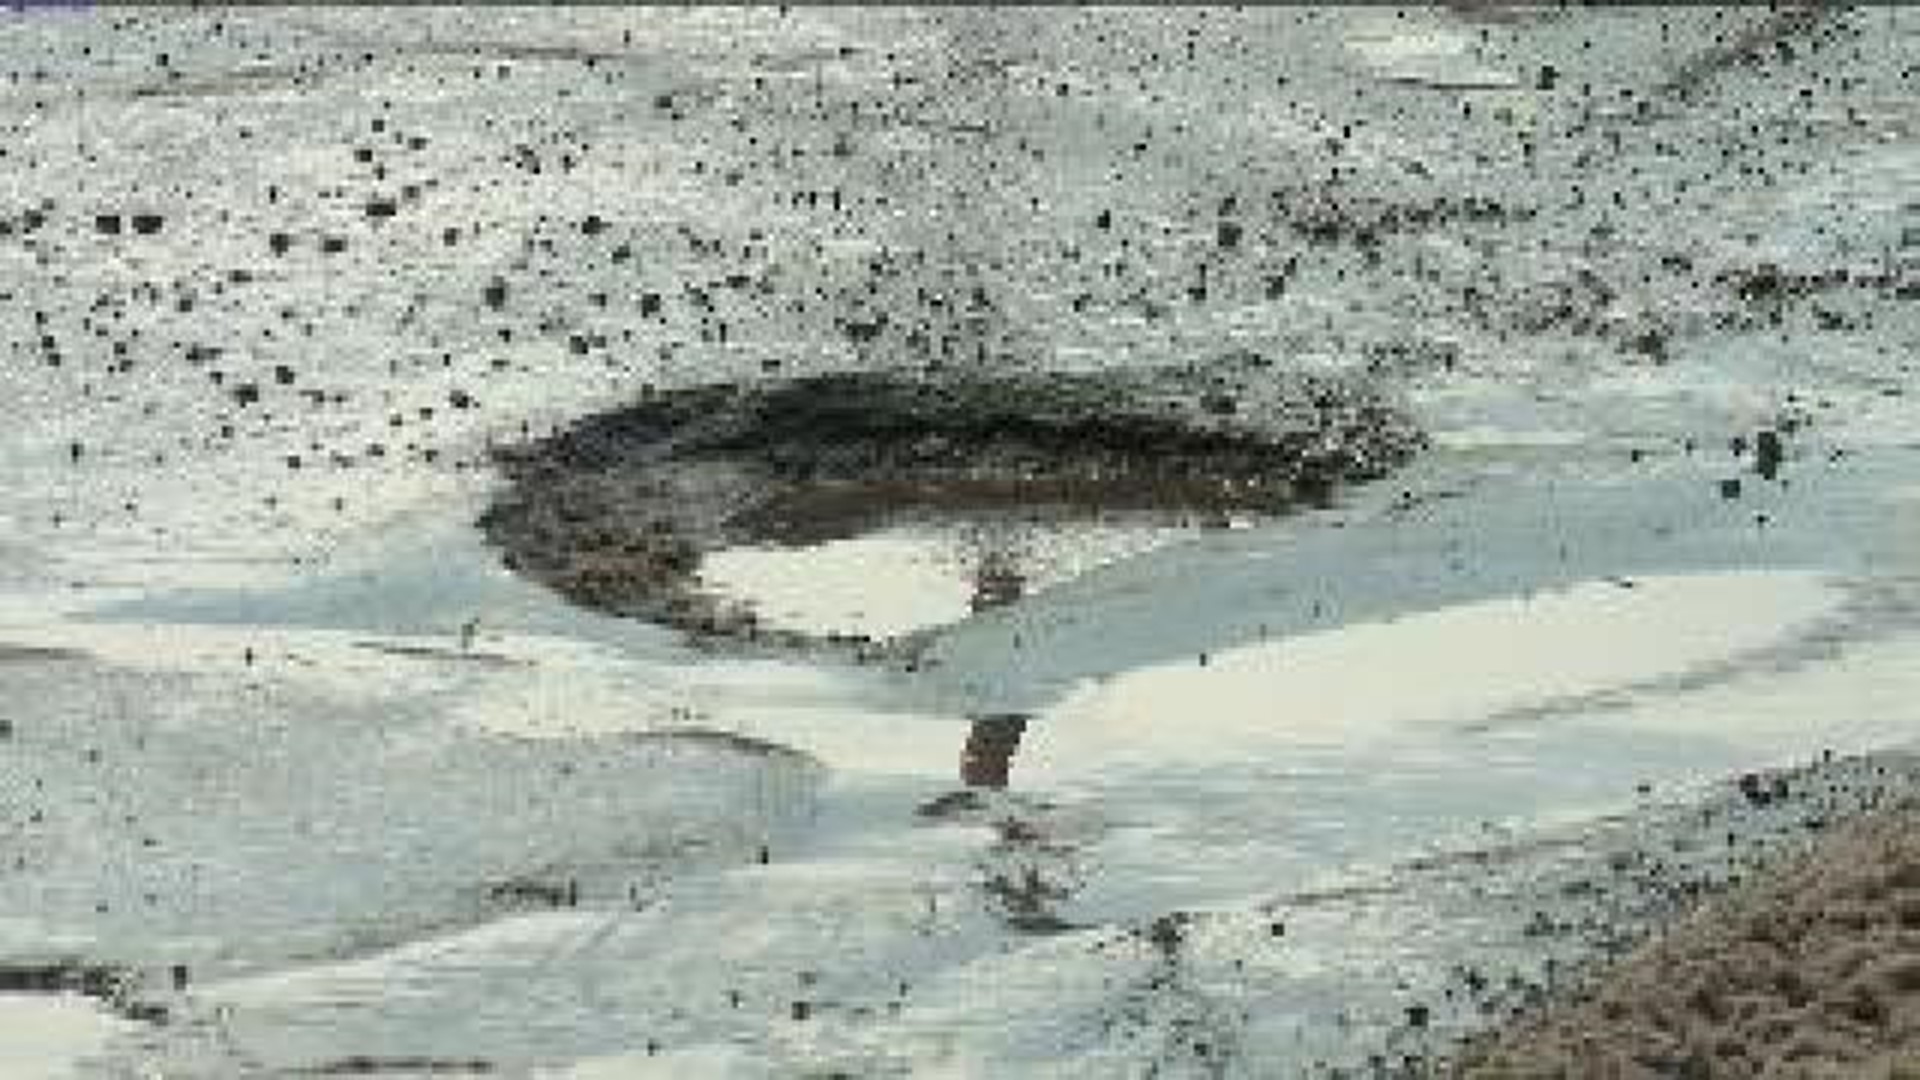 Plan to Patch Potholes Foiled by Snow